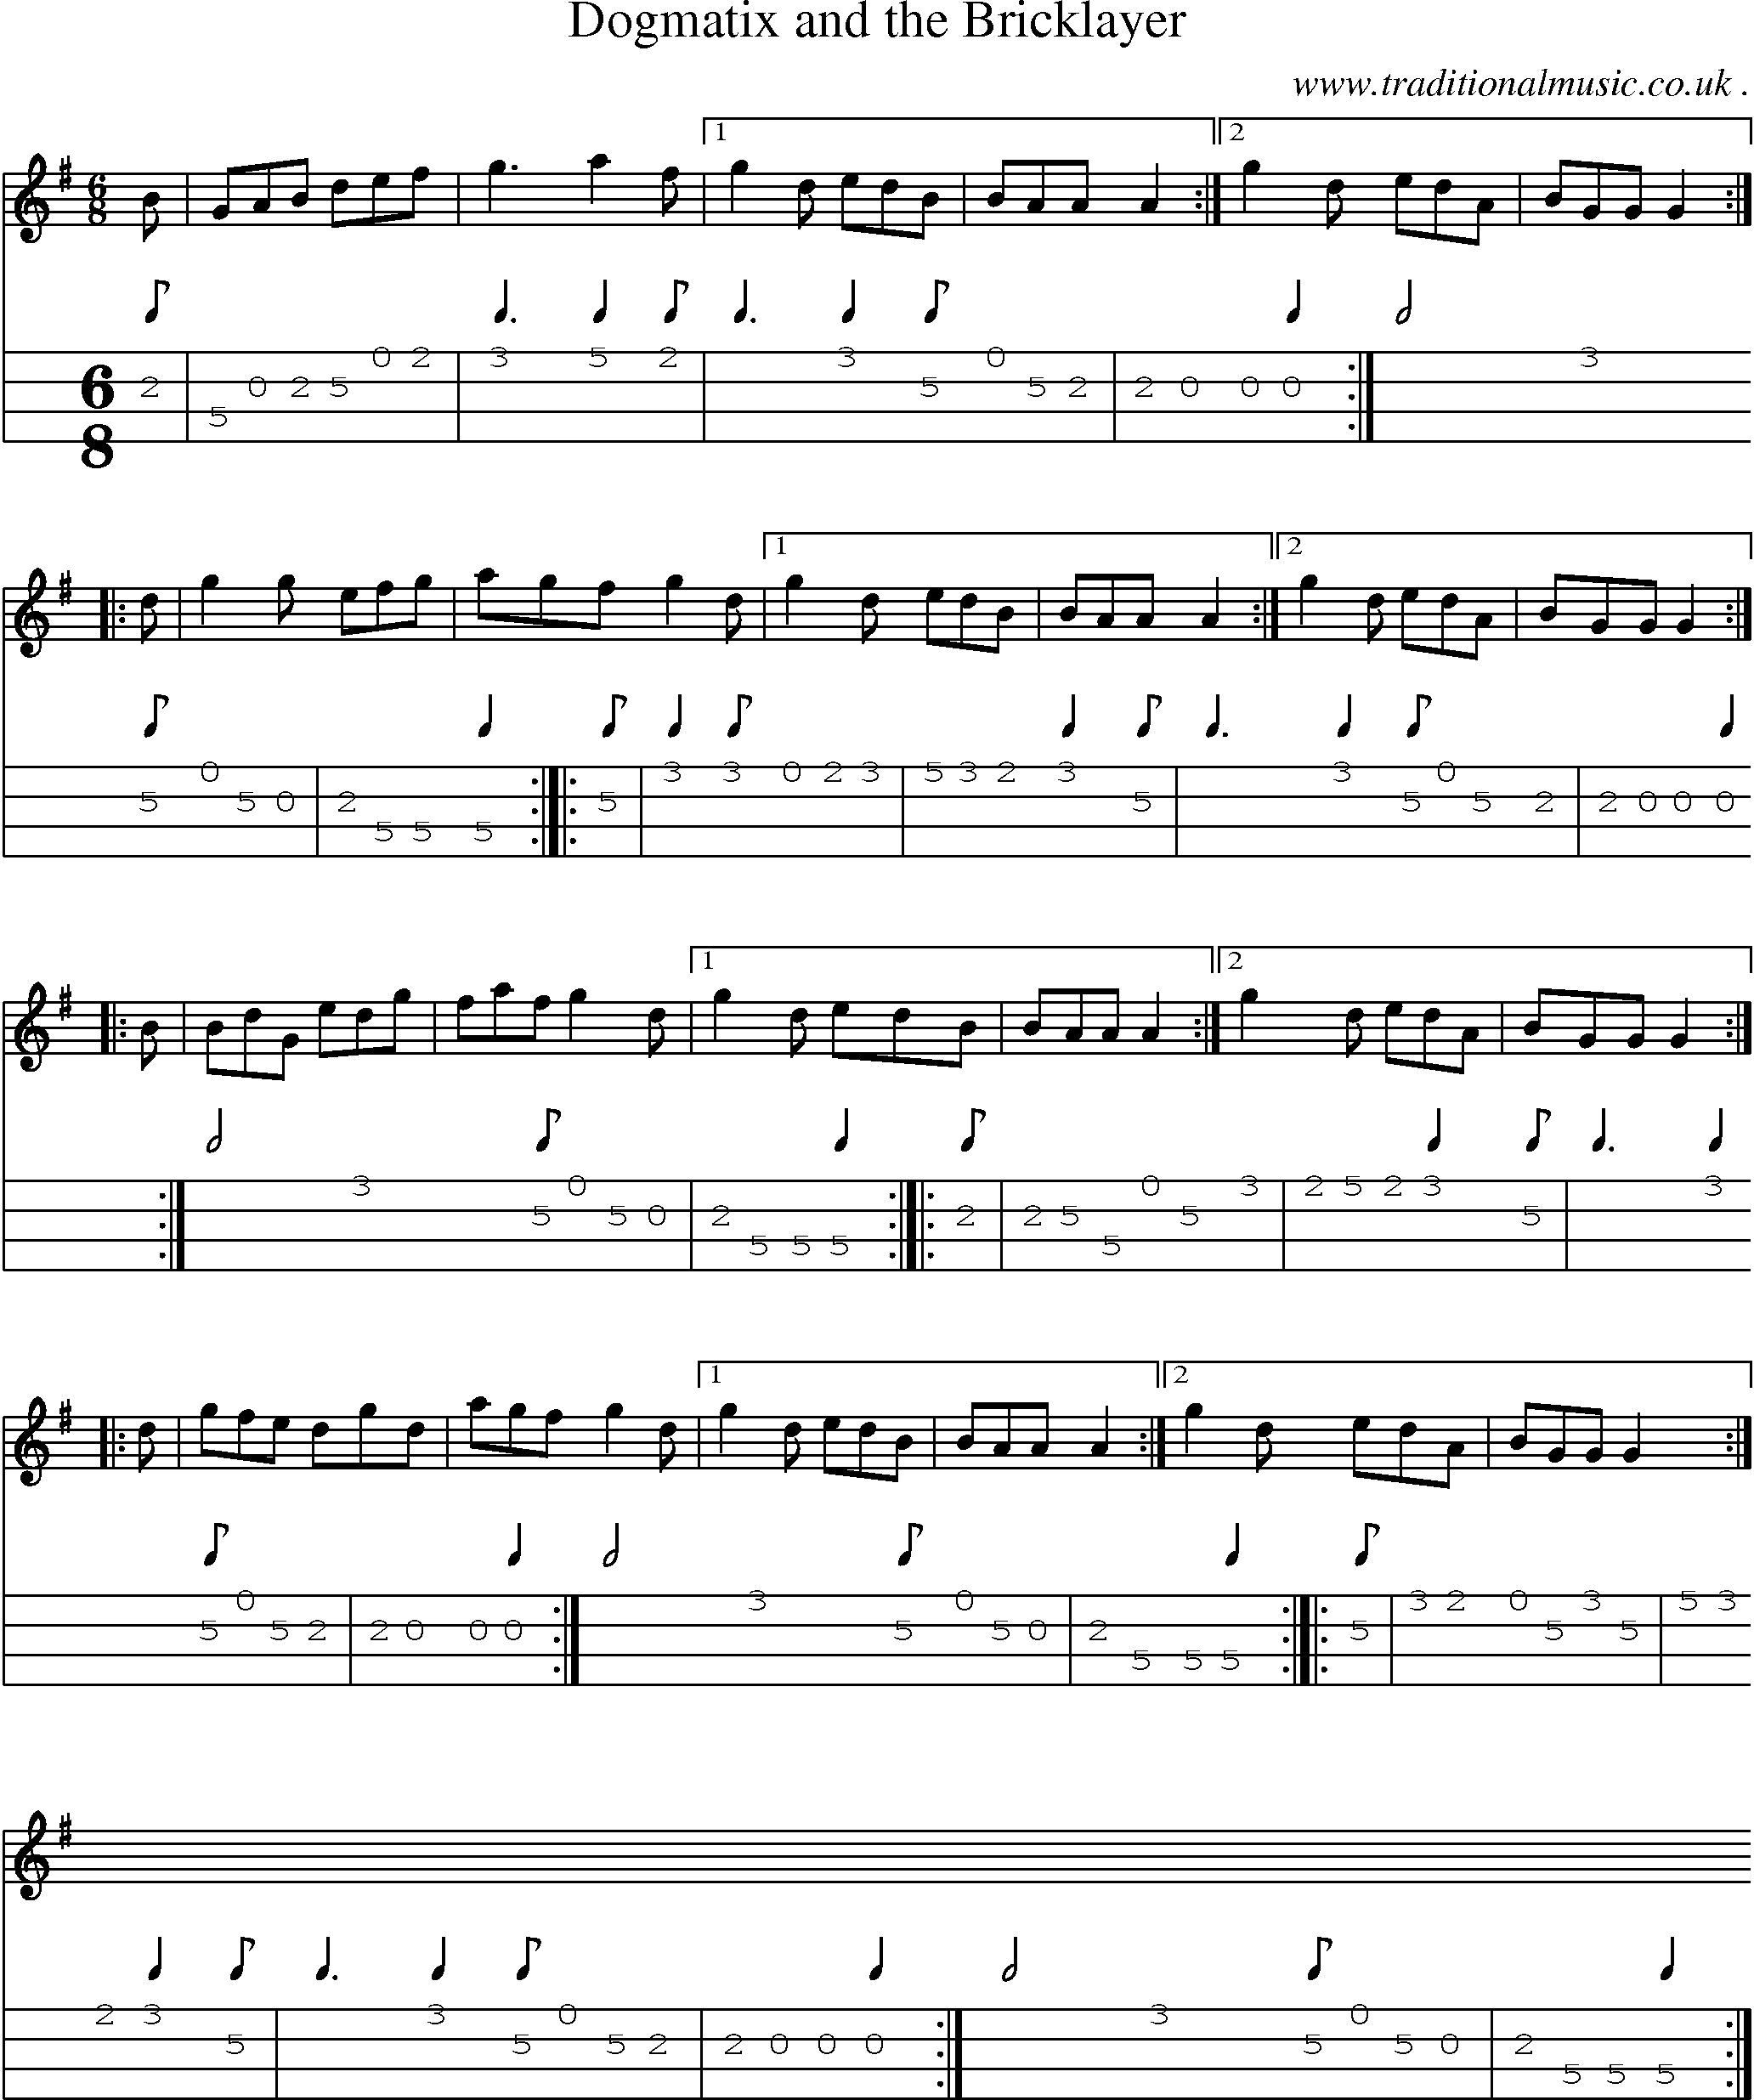 Sheet-music  score, Chords and Mandolin Tabs for Dogmatix And The Bricklayer